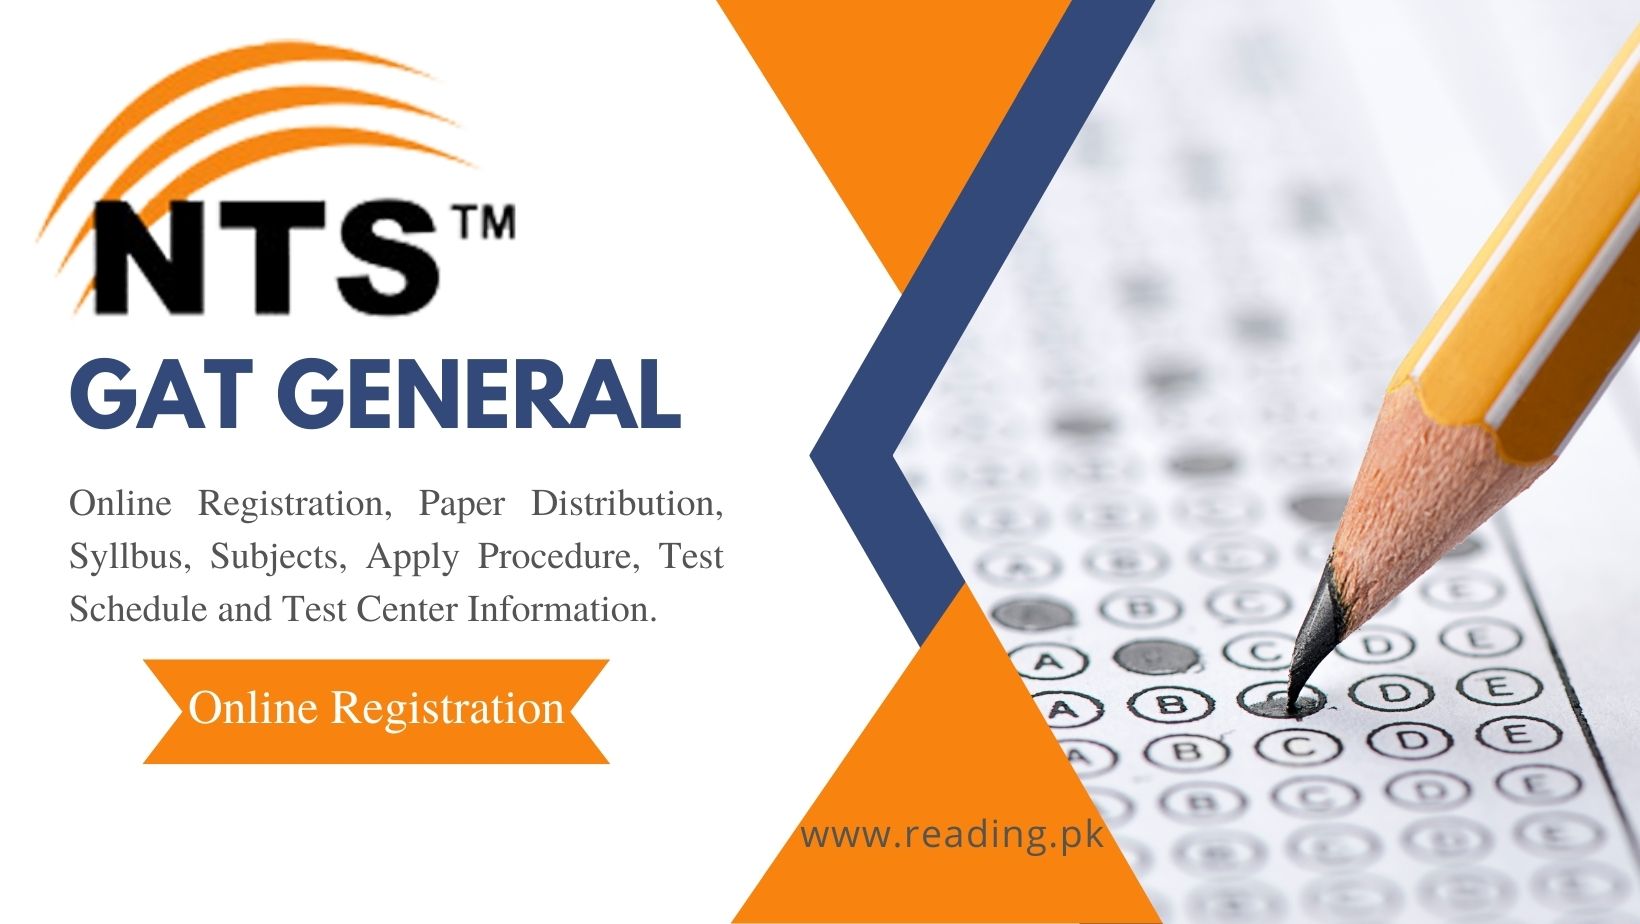 NTS GAT General Online Registration | Syllabus and Schedule